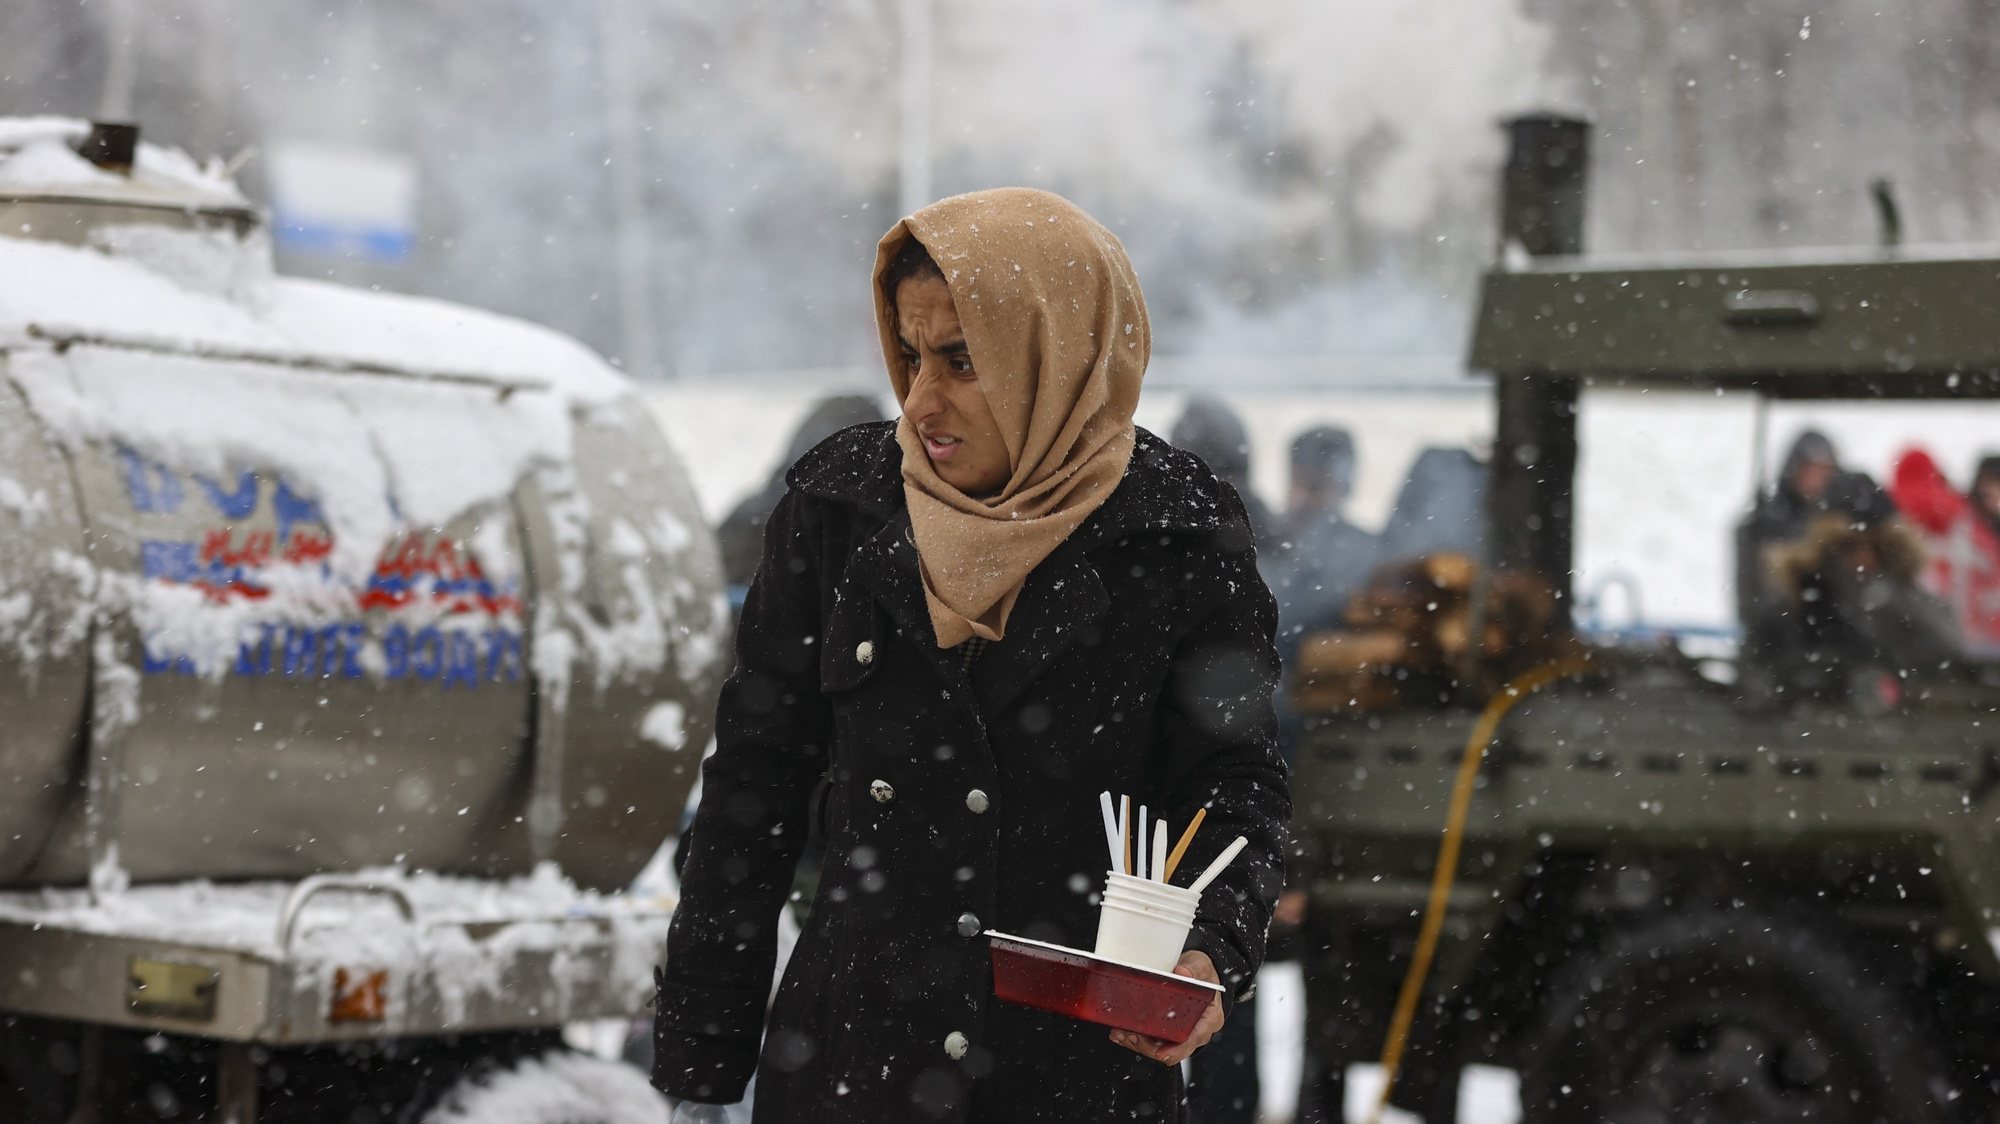 epa09599114 A woman walks to collect food provided by Belarusian servicemen at a camp at the Belarusian-Polish border near the Bruzgi-Kuznica Bialostocka border crossing, in the Grodno region, Belarus, 23 November 2021. Asylum-seekers, refugees and migrants from the Middle East arrived at the Belarusian-Polish checkpoint of Bruzgi-Kuznica aiming to cross the border. Thousands of people who want to obtain asylum in the European Union have been trapped at low temperatures at the border since 08 November.  EPA/STRINGER